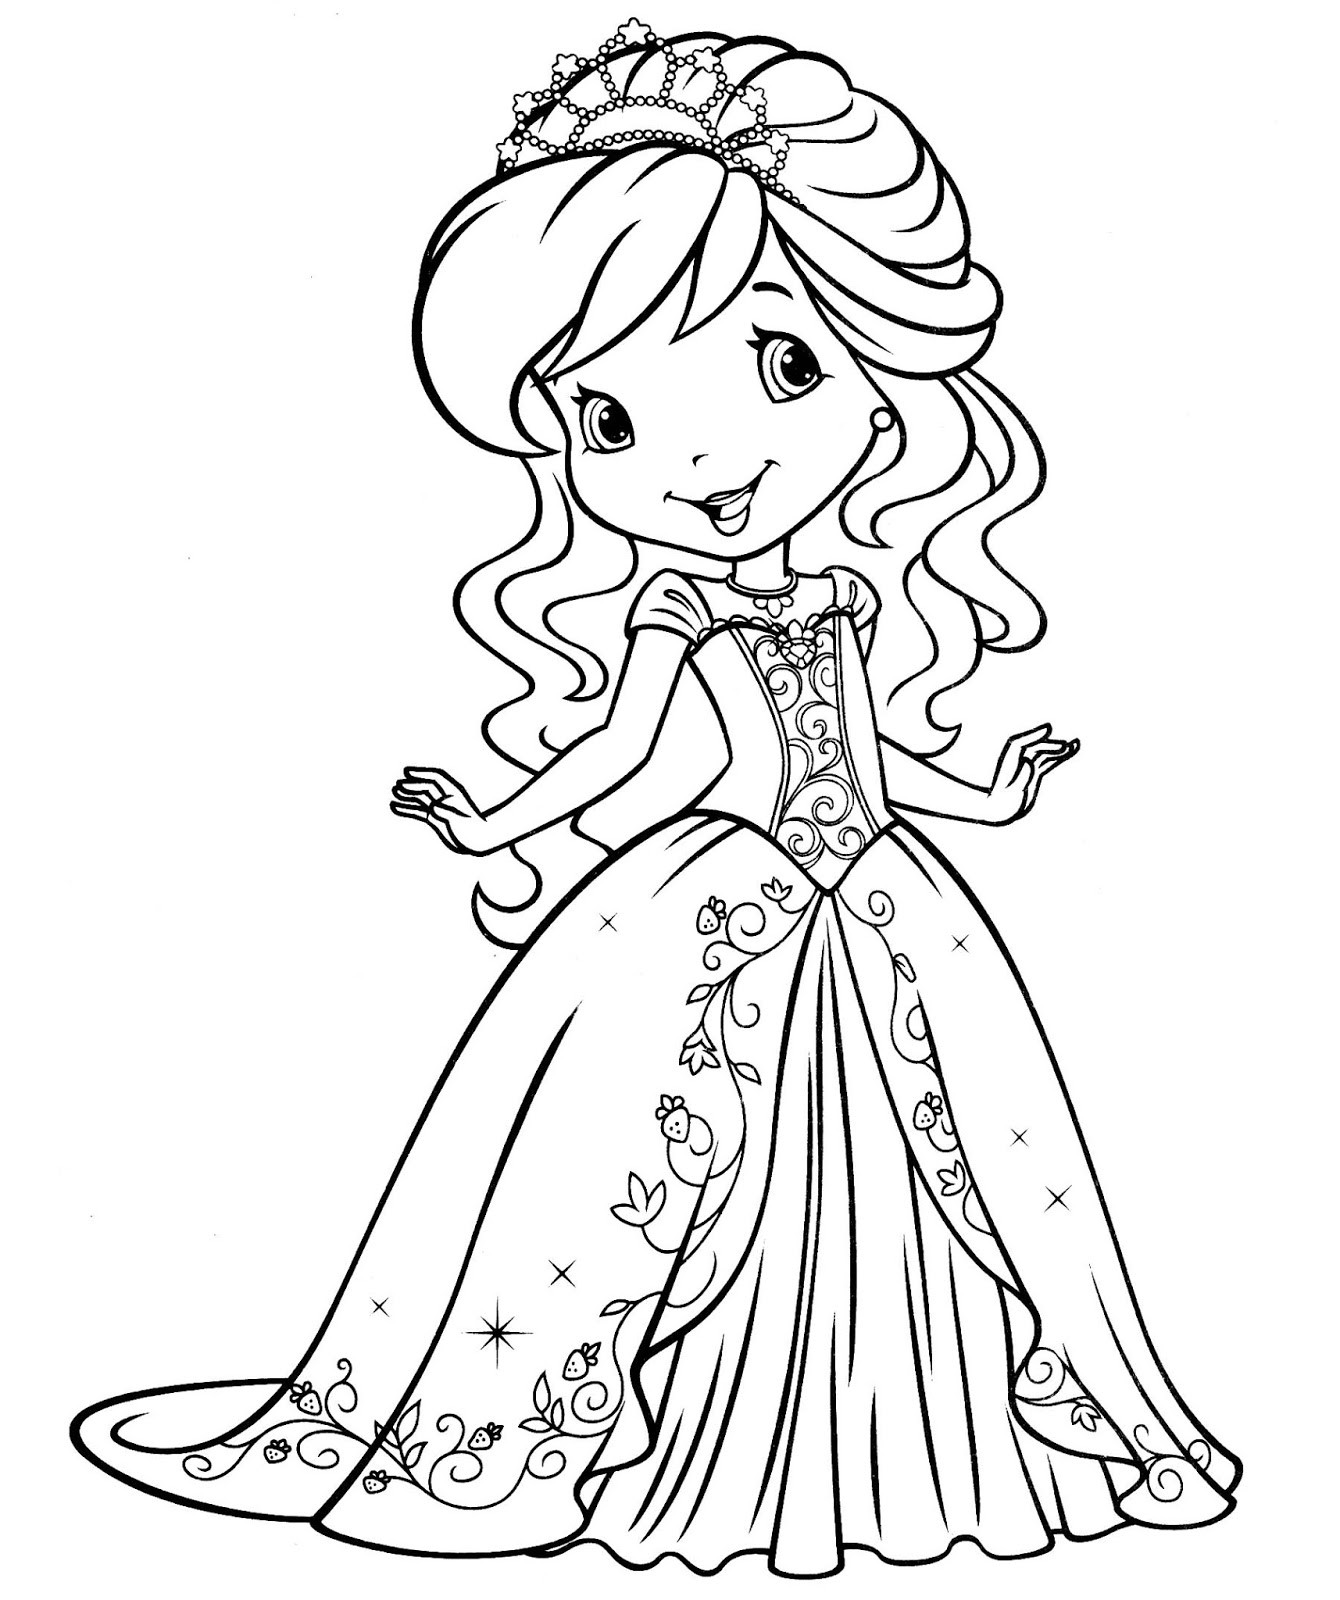 Cute Coloring Pages Of Girls
 Coloring Pages for Girls Best Coloring Pages For Kids